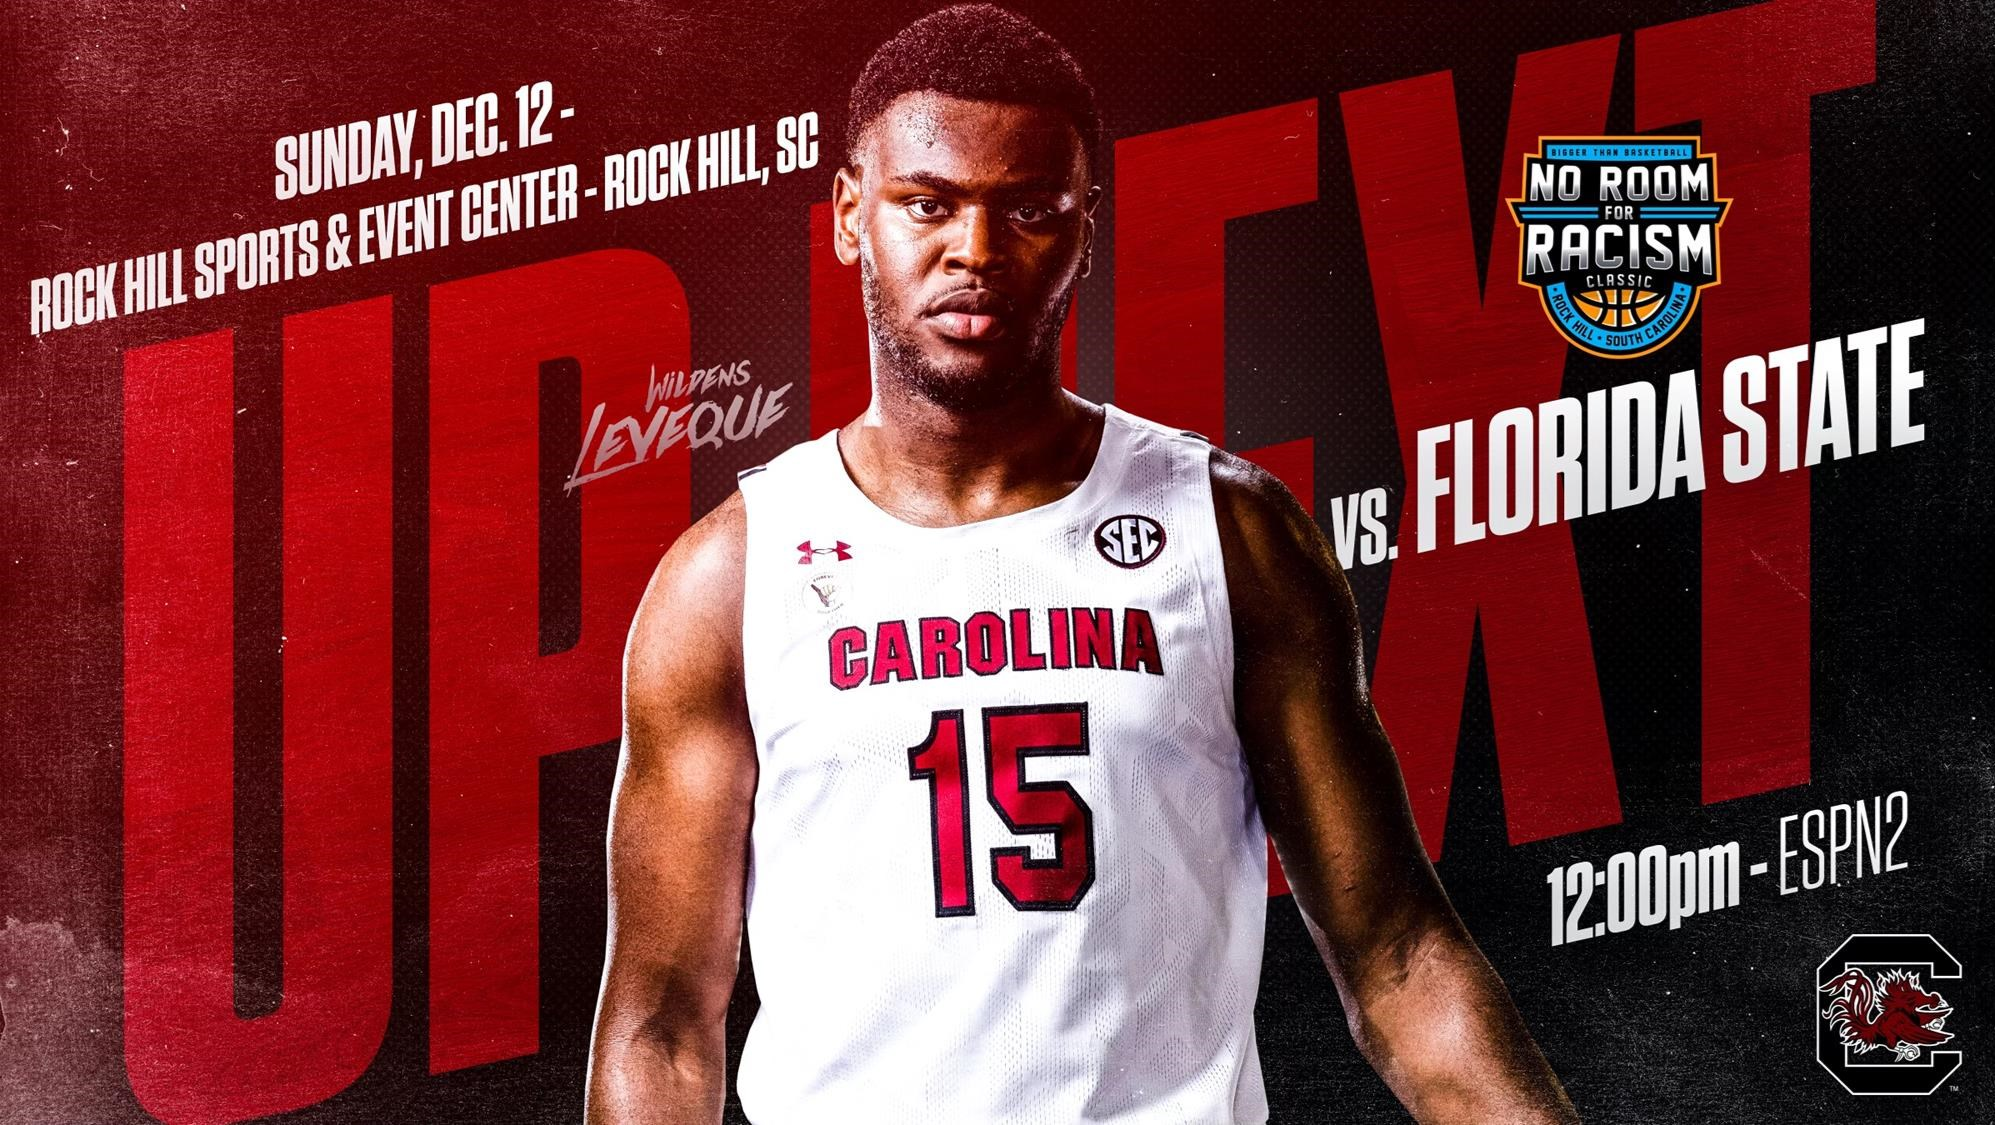 Gamecocks Face Florida State Sunday In No Room For Racism Classic